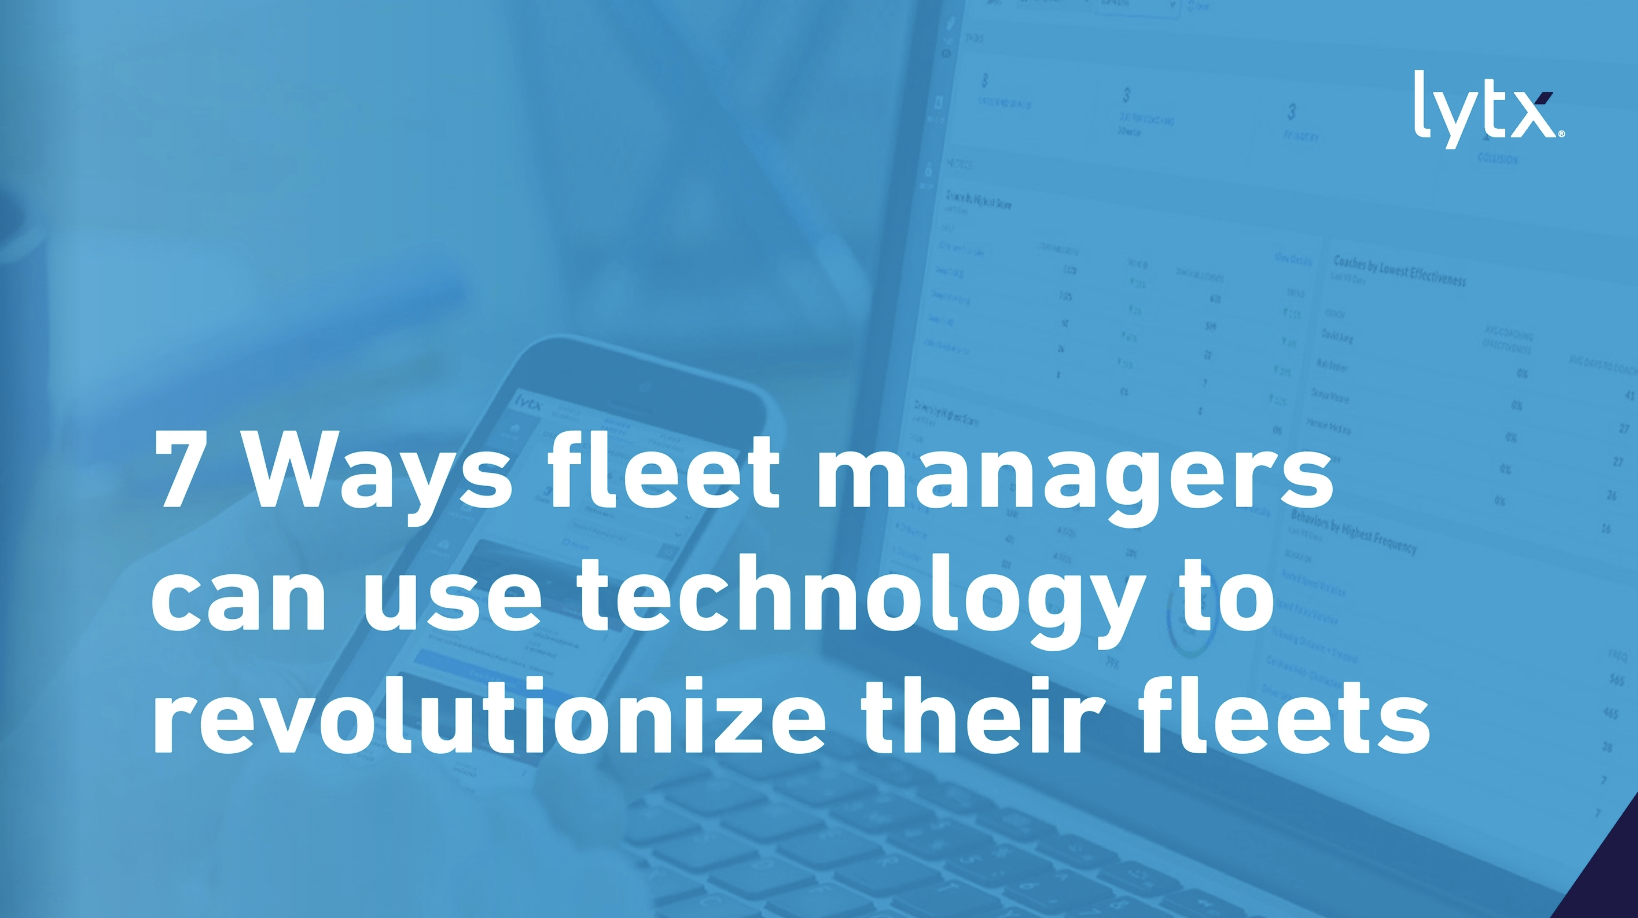 eBook 7 Ways Fleet Managers Can Use Technology To Revolutionize Their Fleets